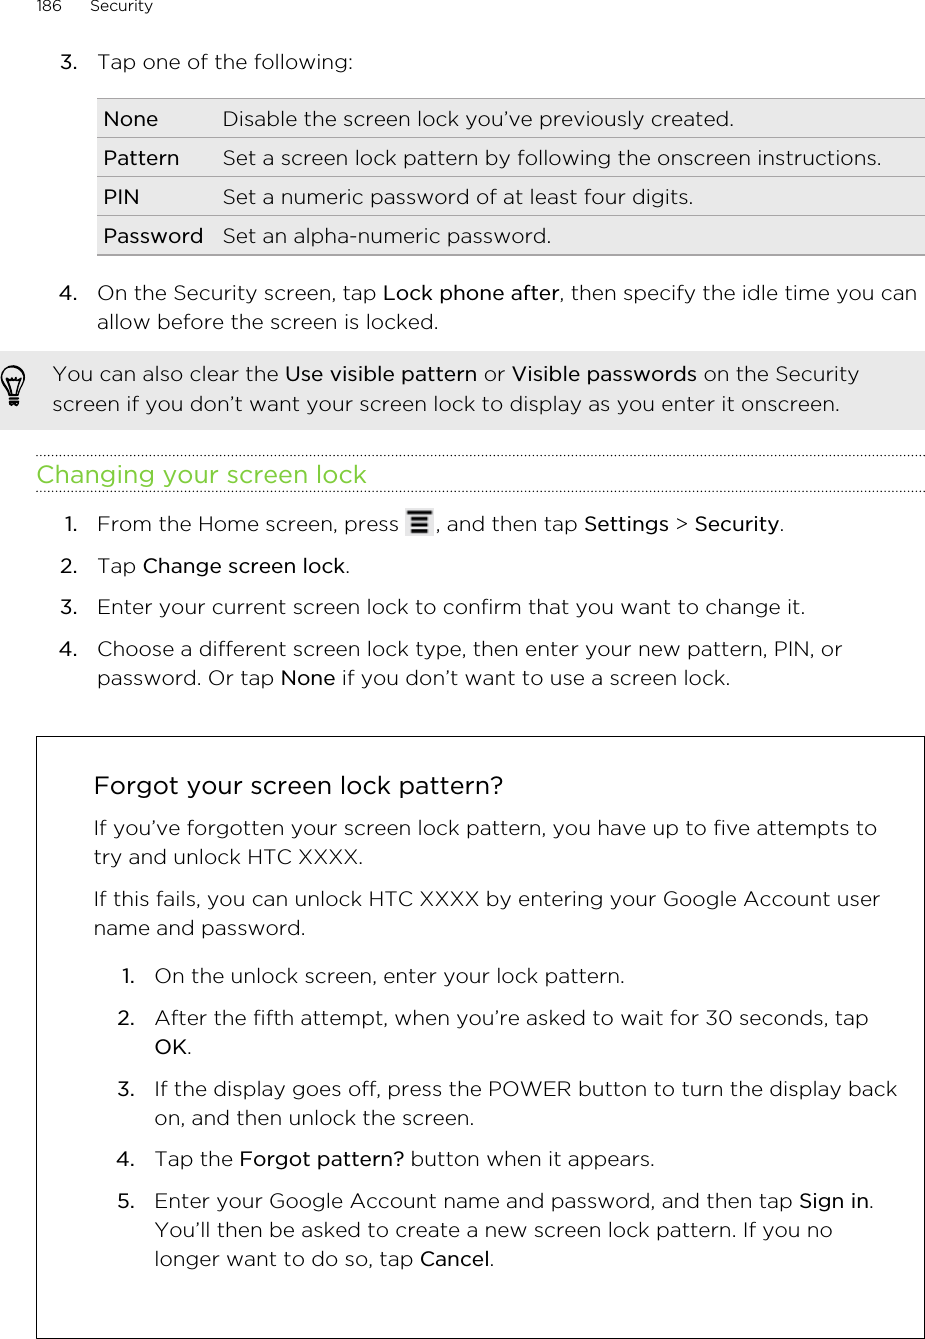 3. Tap one of the following:None Disable the screen lock you’ve previously created.Pattern Set a screen lock pattern by following the onscreen instructions.PIN Set a numeric password of at least four digits.Password Set an alpha-numeric password.4. On the Security screen, tap Lock phone after, then specify the idle time you canallow before the screen is locked. You can also clear the Use visible pattern or Visible passwords on the Securityscreen if you don’t want your screen lock to display as you enter it onscreen.Changing your screen lock1. From the Home screen, press  , and then tap Settings &gt; Security.2. Tap Change screen lock.3. Enter your current screen lock to confirm that you want to change it.4. Choose a different screen lock type, then enter your new pattern, PIN, orpassword. Or tap None if you don’t want to use a screen lock.Forgot your screen lock pattern?If you’ve forgotten your screen lock pattern, you have up to five attempts totry and unlock HTC XXXX.If this fails, you can unlock HTC XXXX by entering your Google Account username and password.1. On the unlock screen, enter your lock pattern.2. After the fifth attempt, when you’re asked to wait for 30 seconds, tapOK.3. If the display goes off, press the POWER button to turn the display backon, and then unlock the screen.4. Tap the Forgot pattern? button when it appears.5. Enter your Google Account name and password, and then tap Sign in.You’ll then be asked to create a new screen lock pattern. If you nolonger want to do so, tap Cancel.186 Security